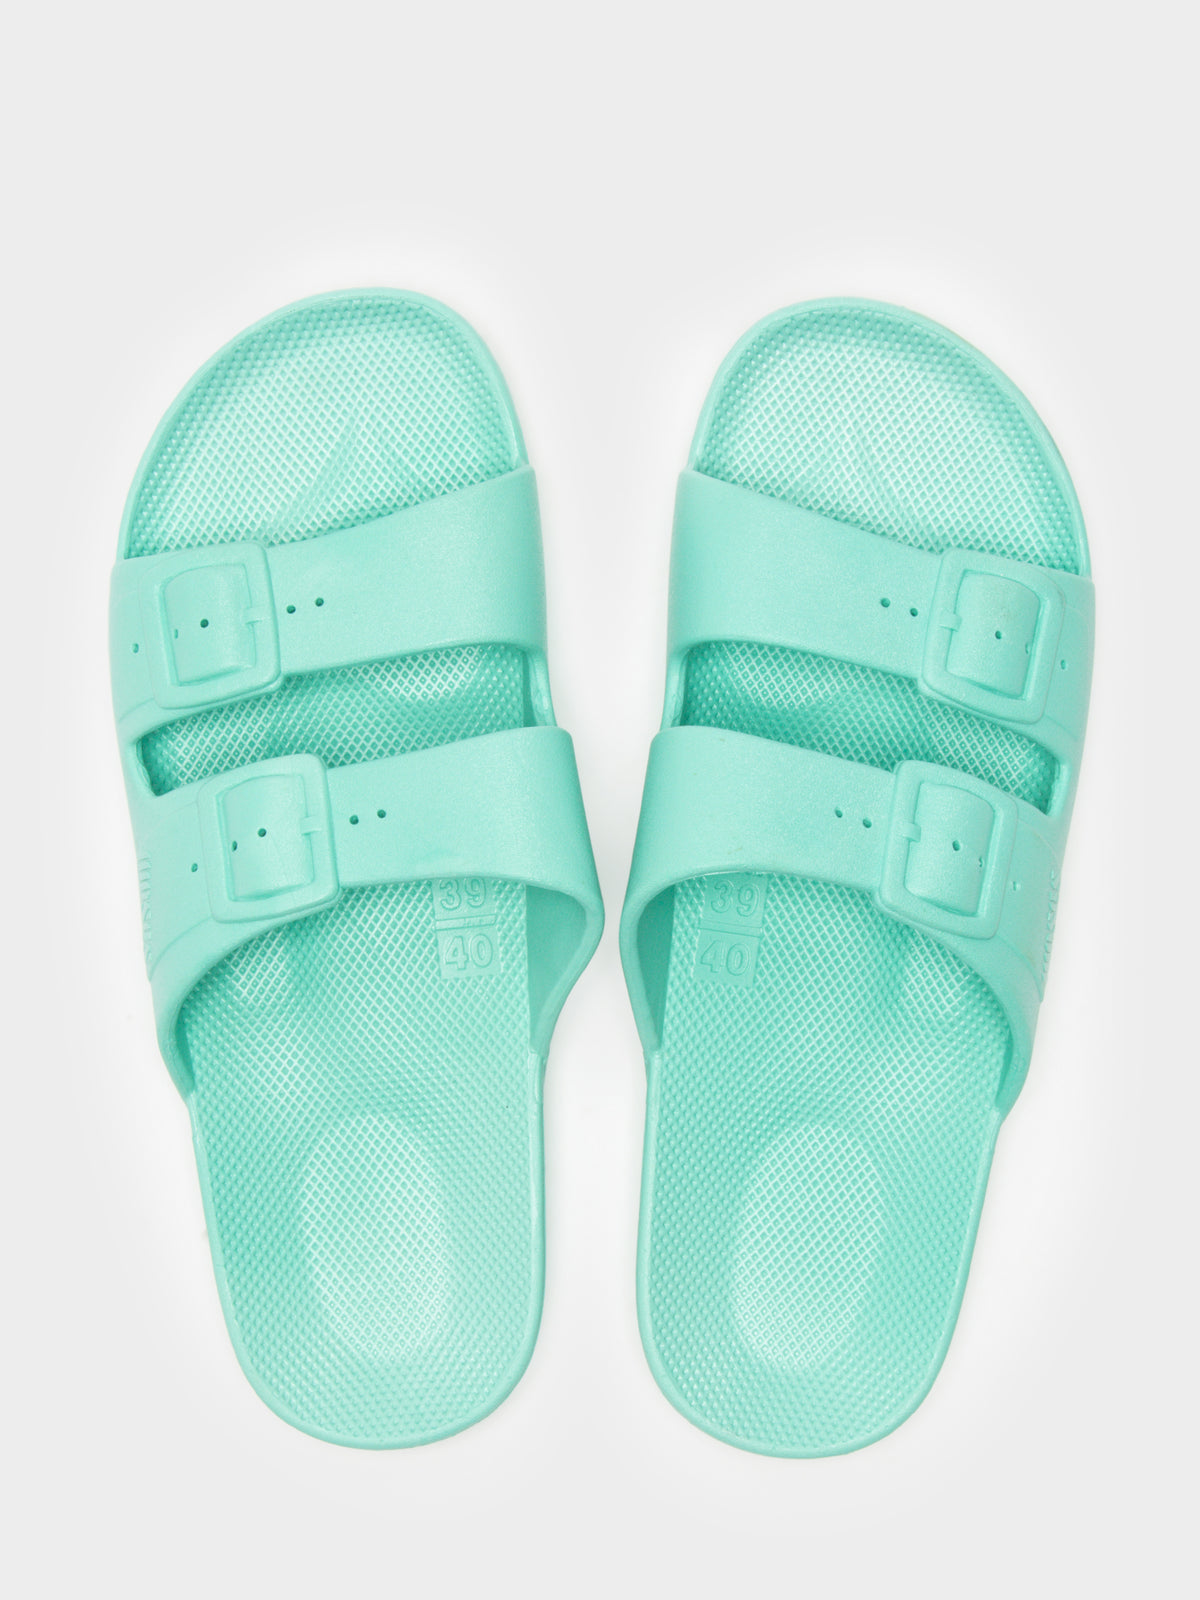 Unisex Freedom Moses Slides in Miami Teal